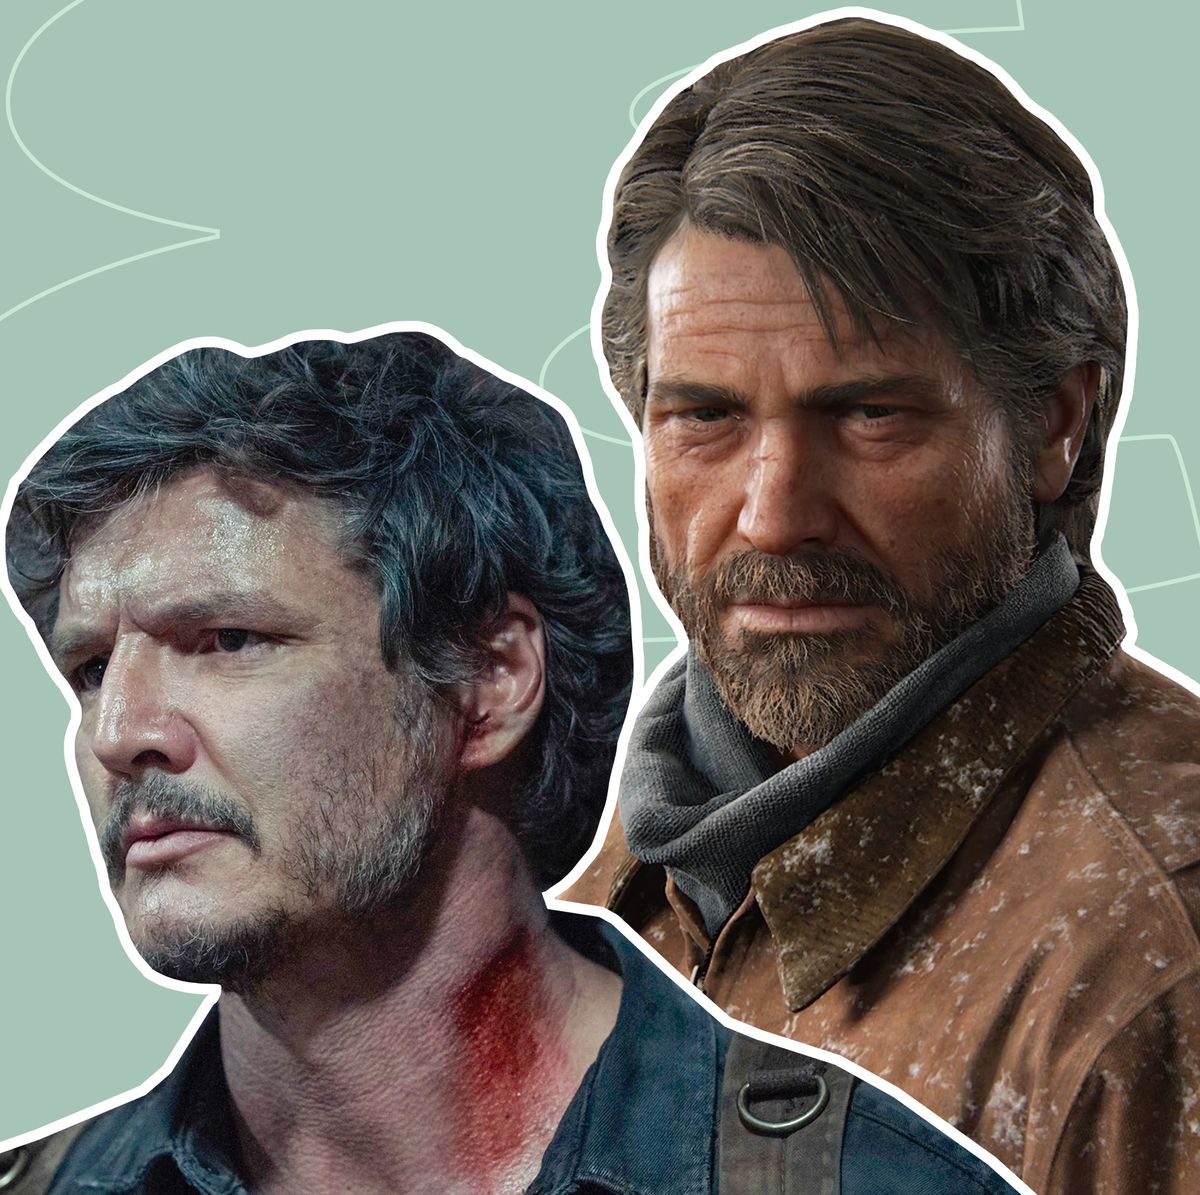 The Last of Us' ending explained: Did Joel make the right choice